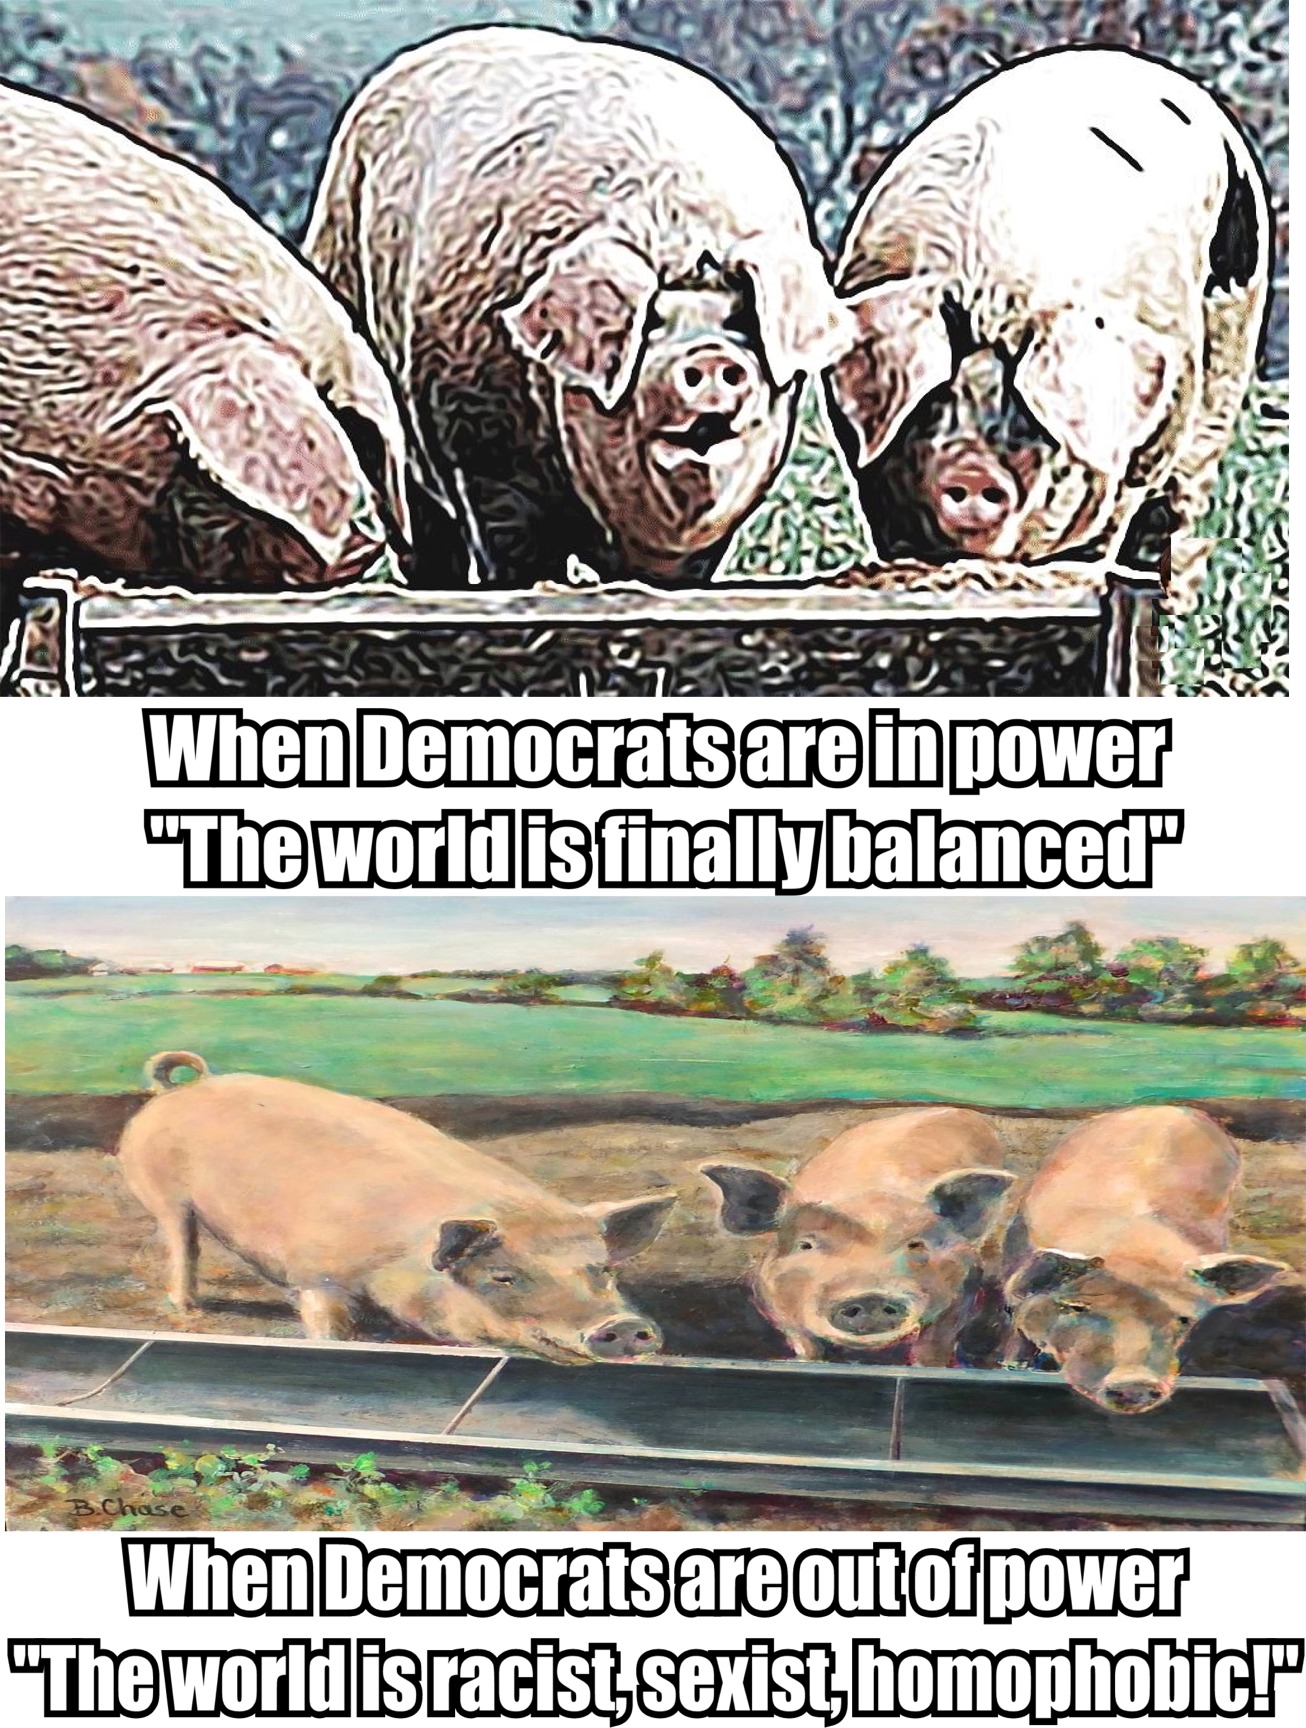 memes -  domestic pig - ASW33 When Democrats are in power The world is finally balanced When Democrats are out of power The world is racist, sexist homophobic!